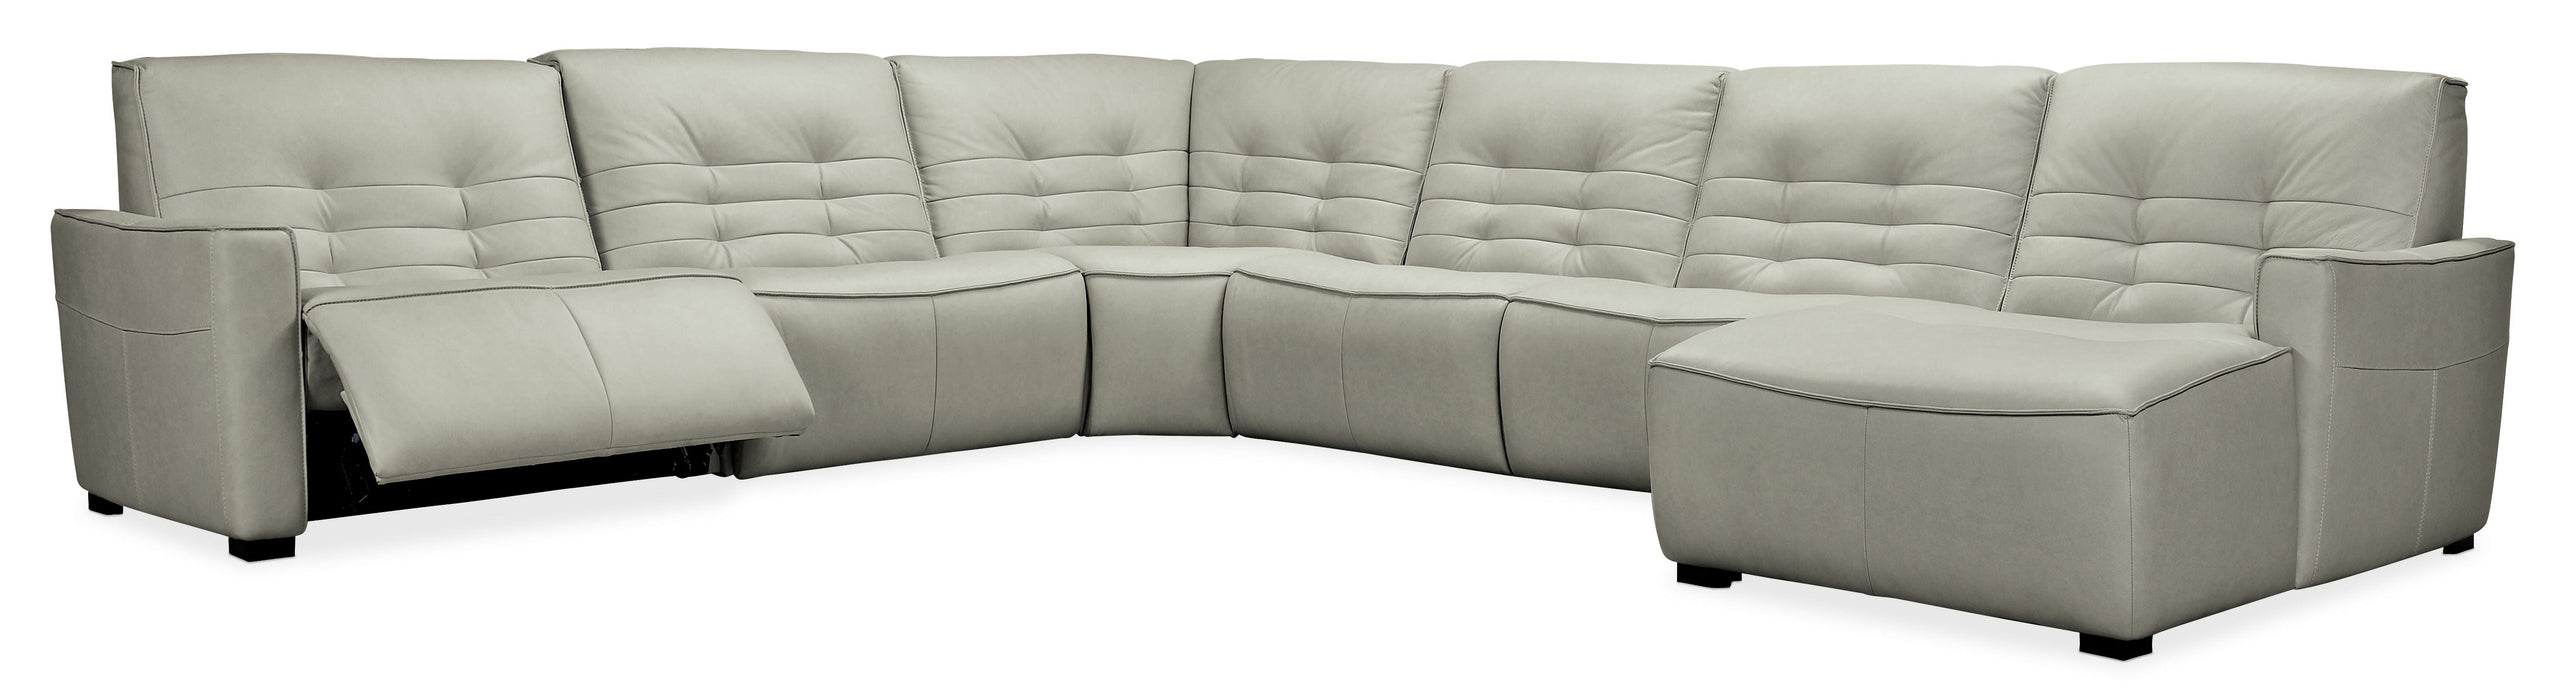 Reaux Grandier 6-Piece RAF Chaise Sectional With 2 Recliners